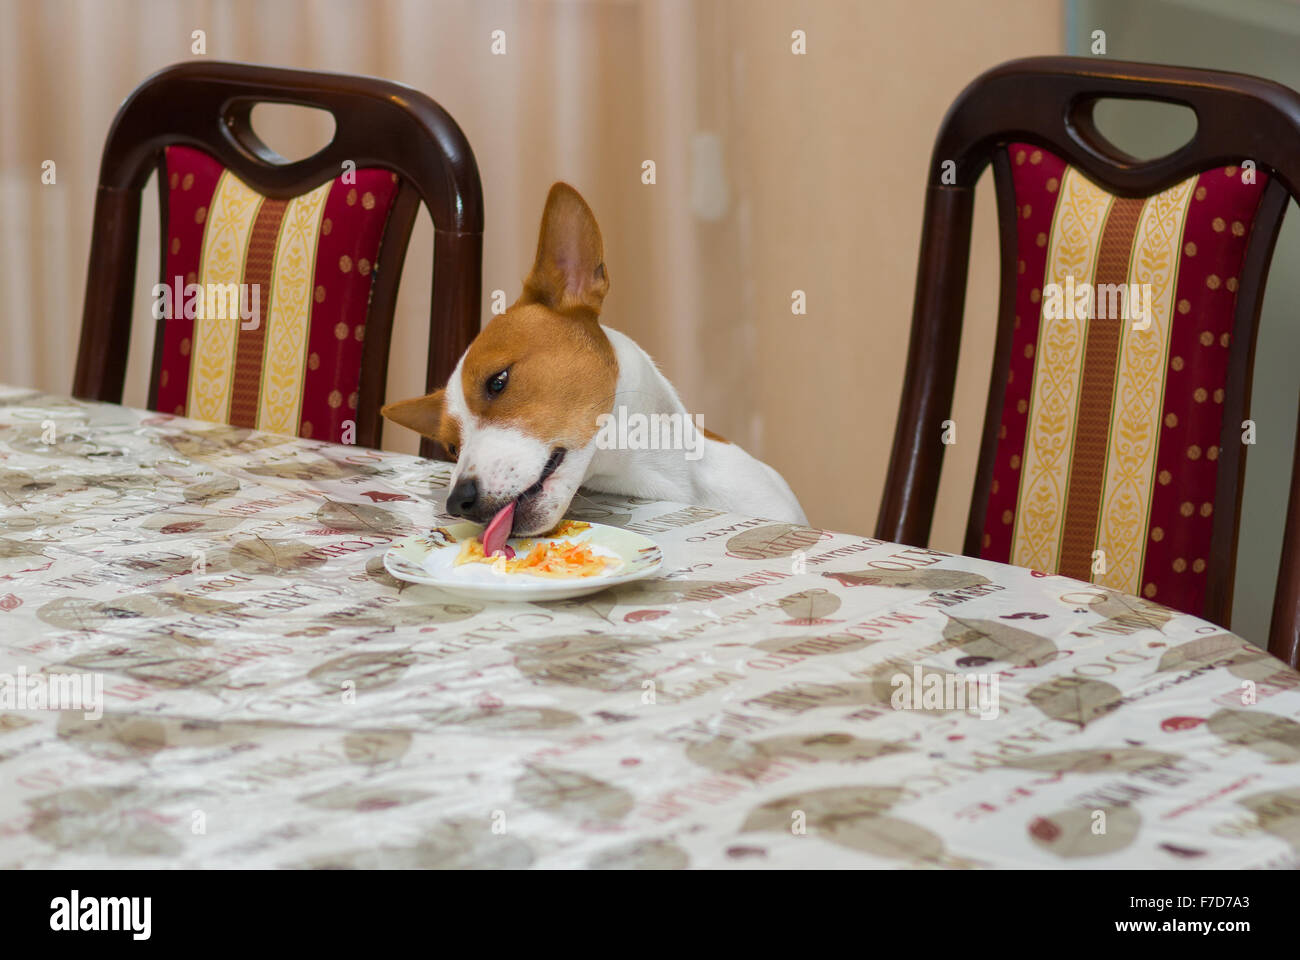 Cheeky dog steals sauerkraut lost in a plate while beings home alone Stock Photo